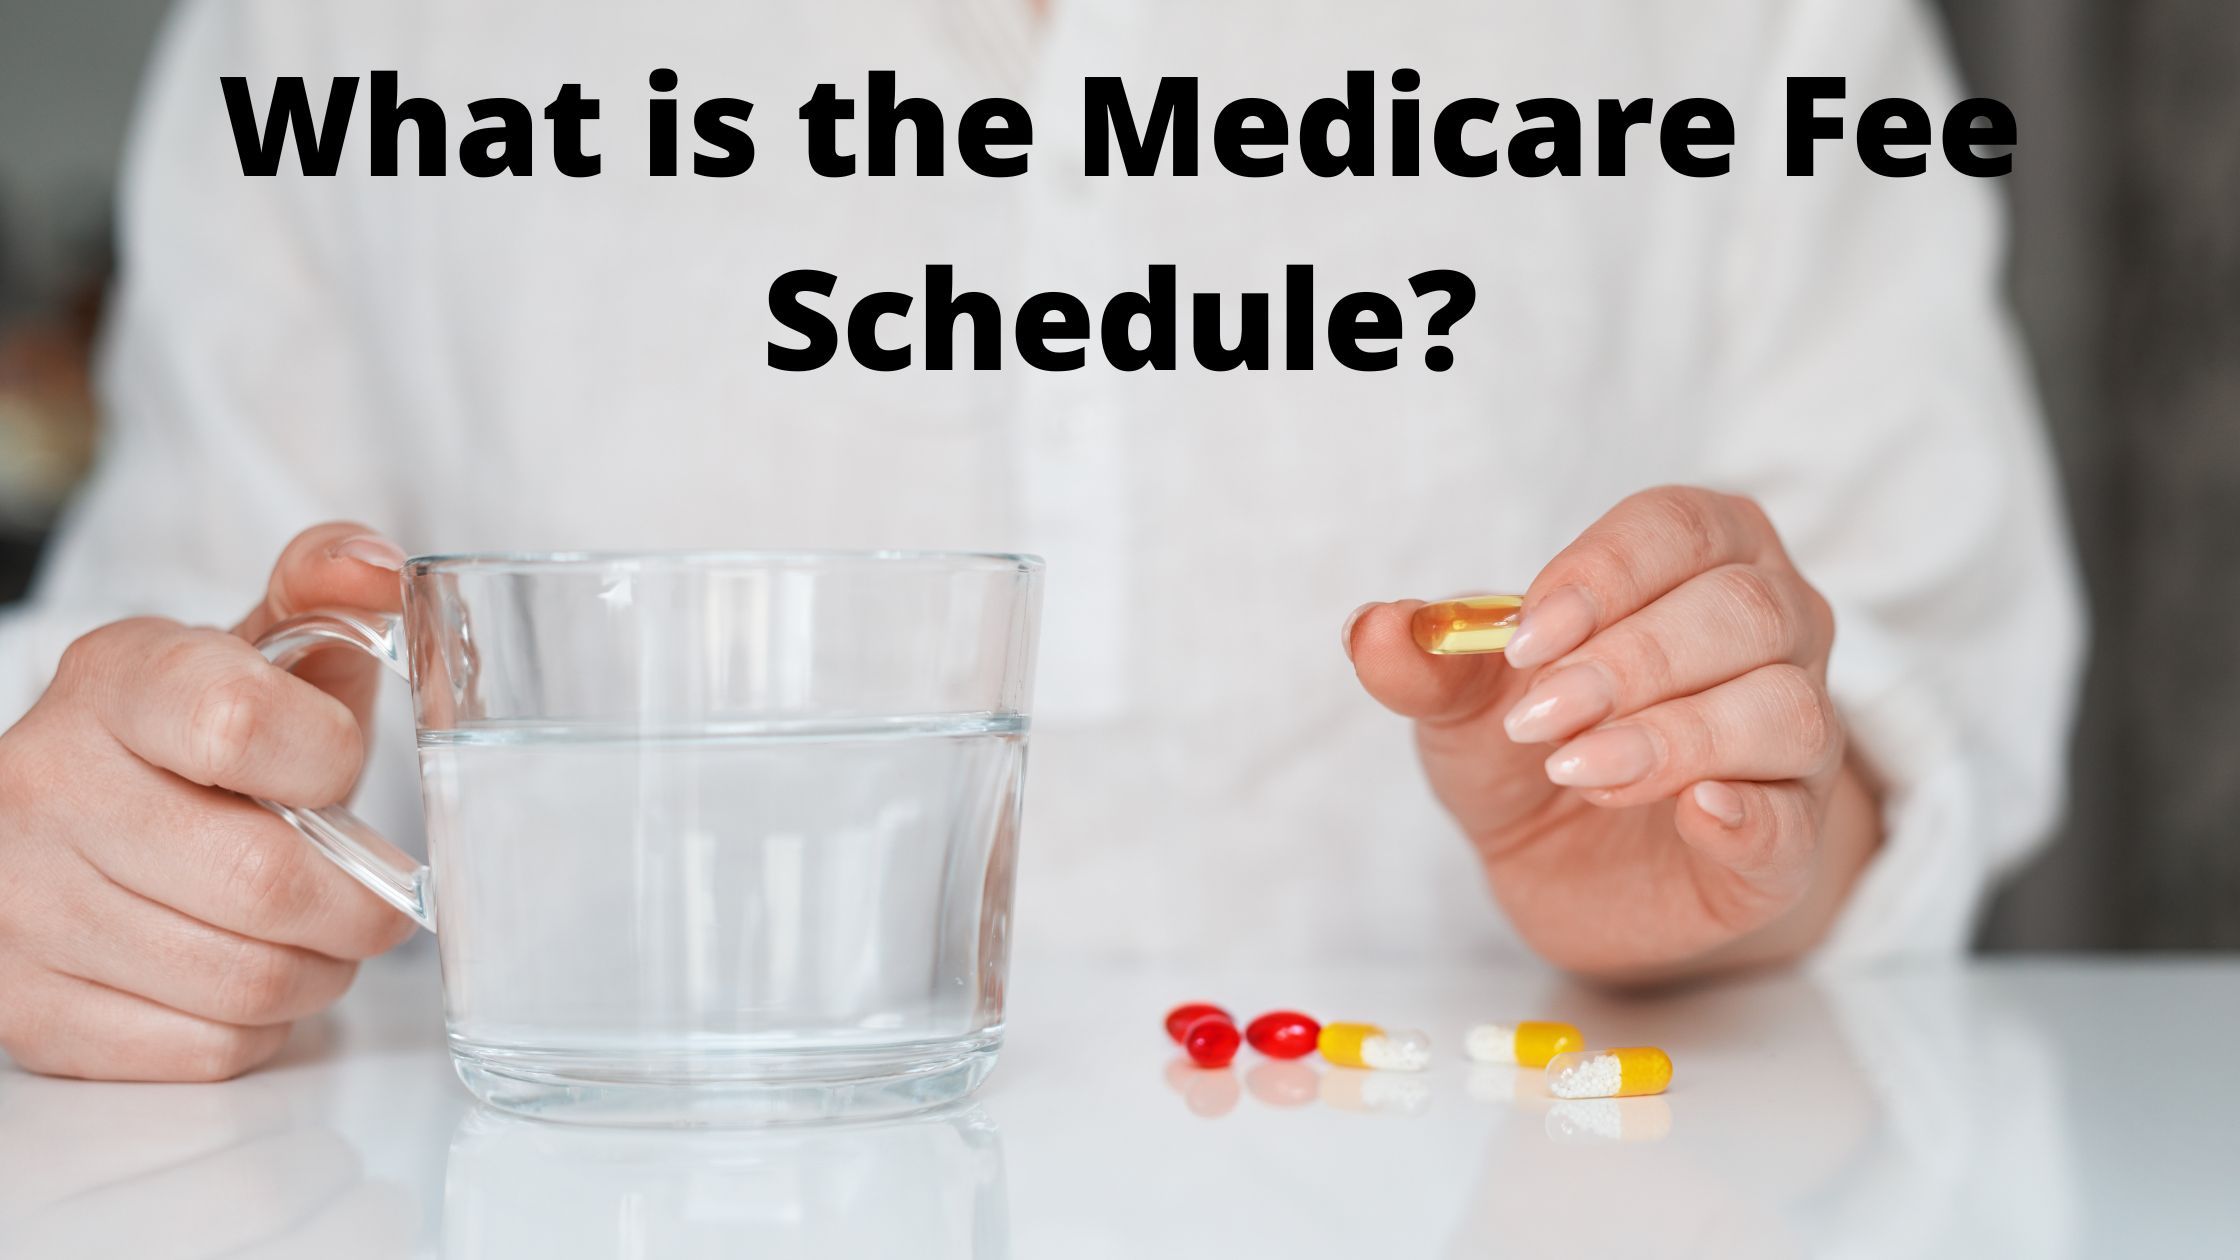 Medicare Fee Schedule Everything You Need to Know